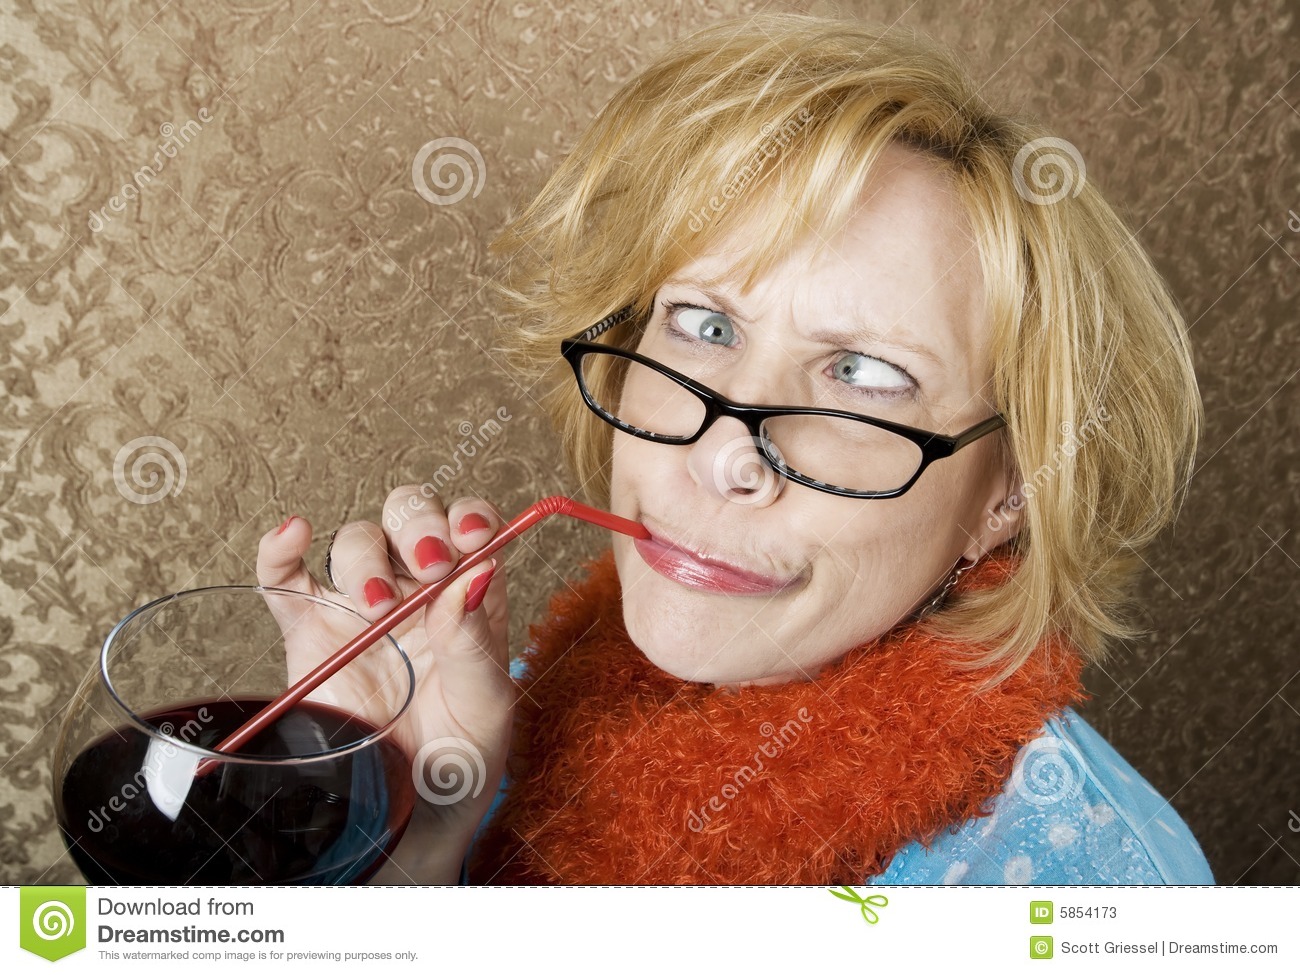 Crazy Woman With Crossed Eyes Drinking Wine Through A Straw